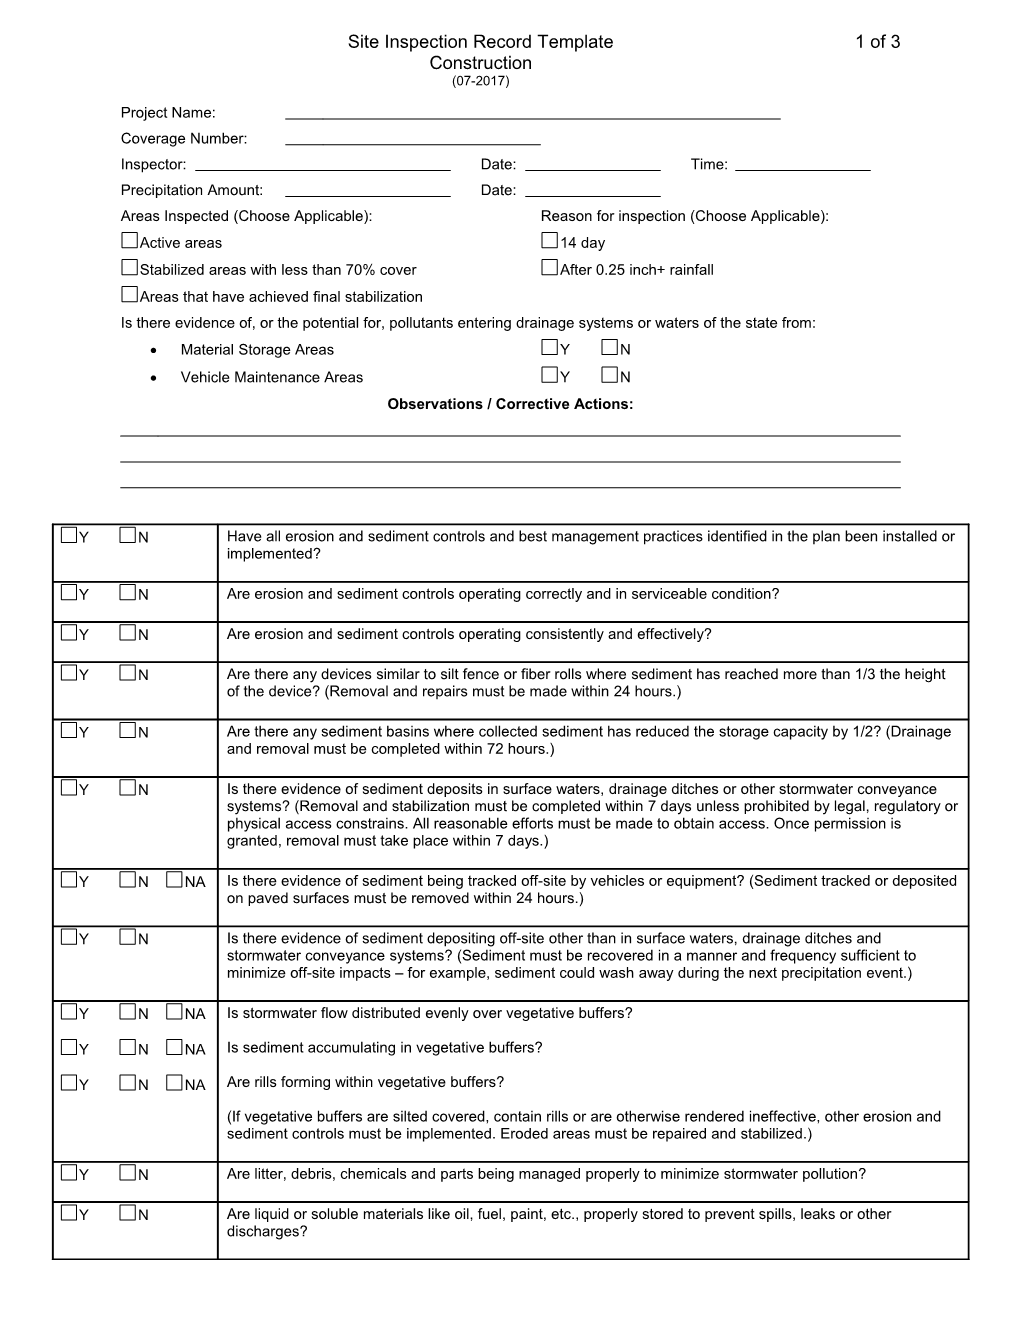 Site Inspection Record Template 3 of 3